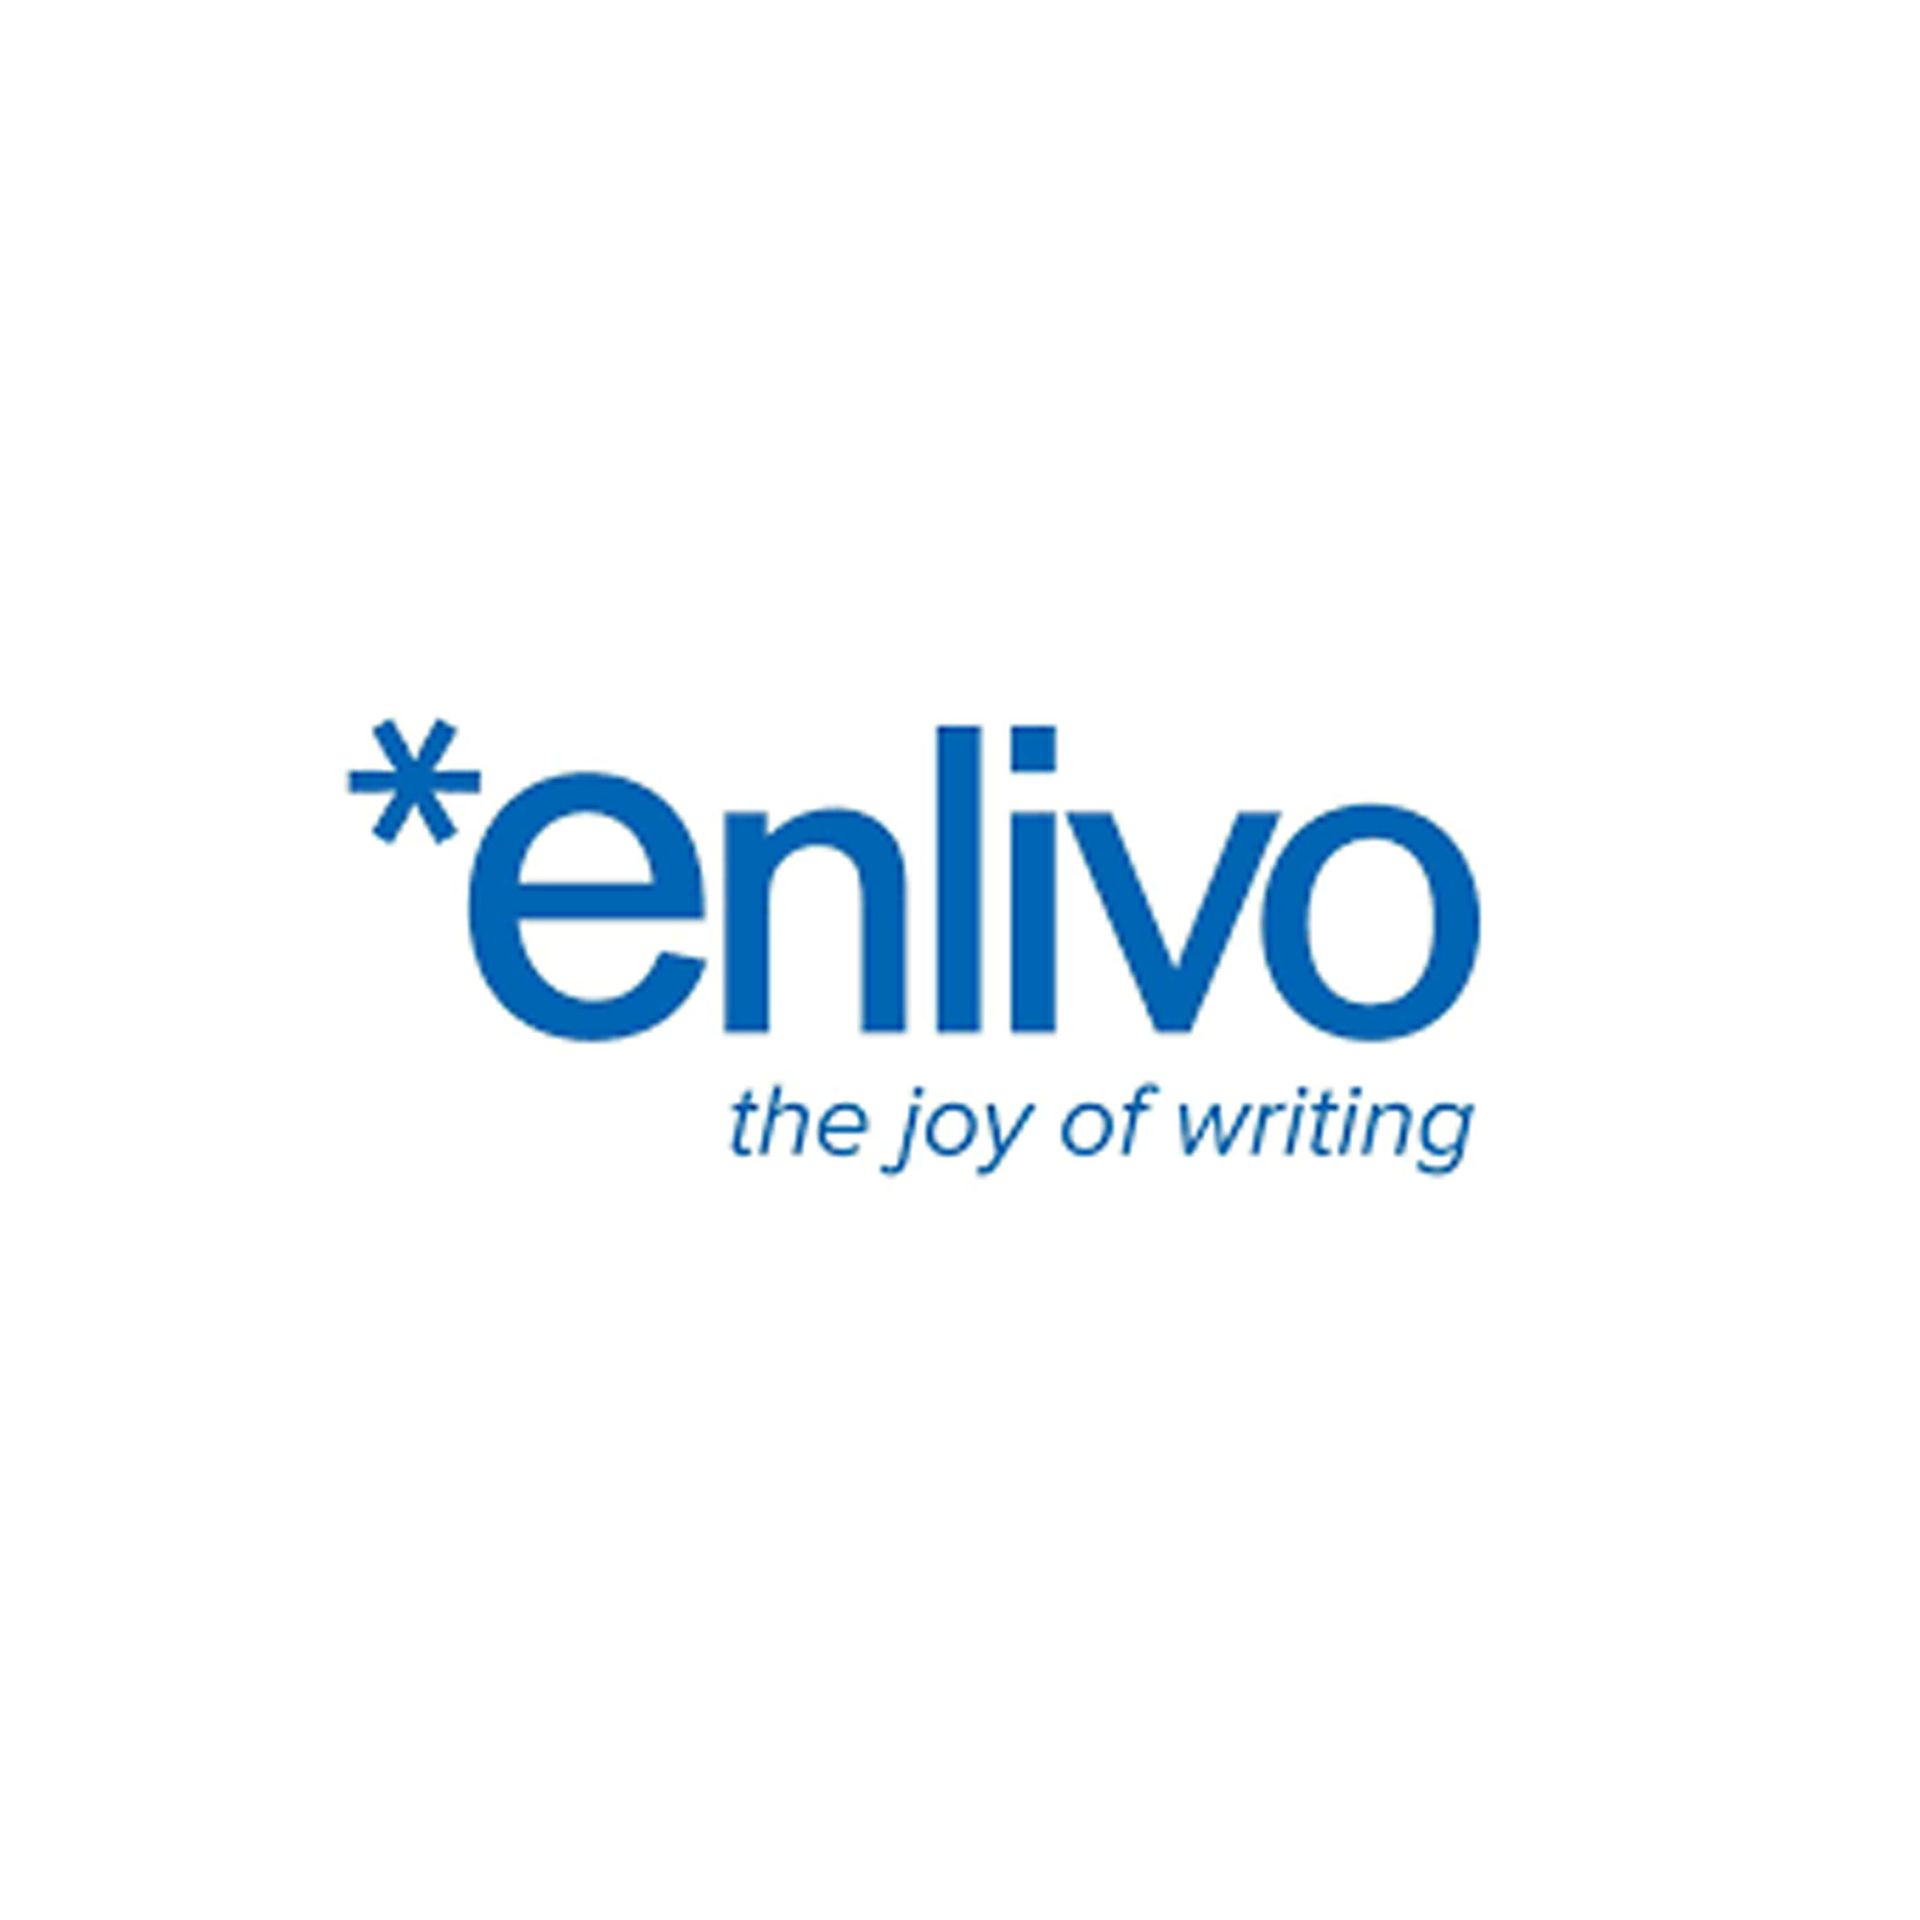 Product Brand: Enlivo